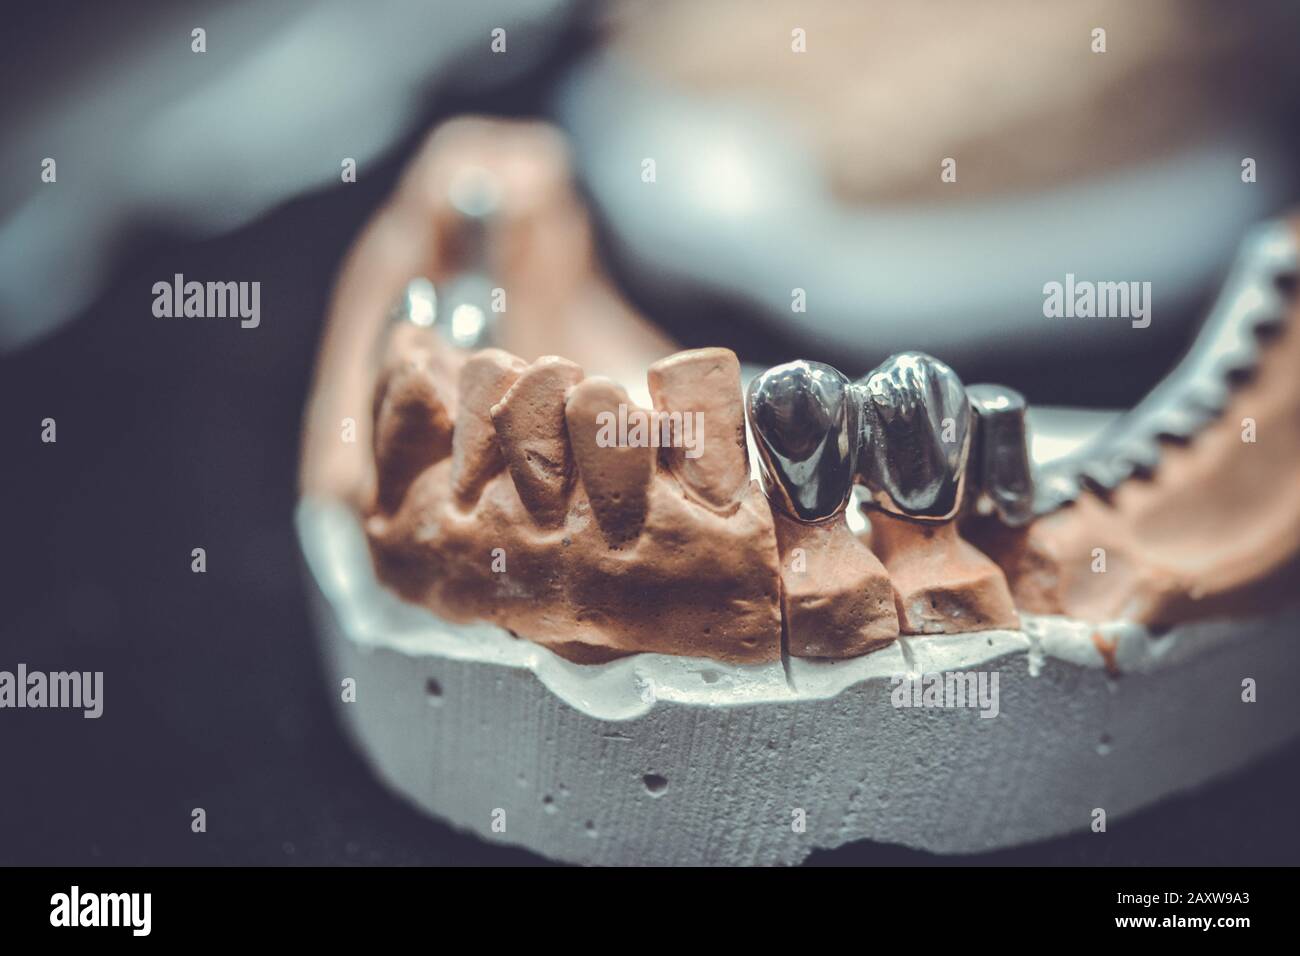 example of a bridge on an artificial human jaw close-up Stock Photo